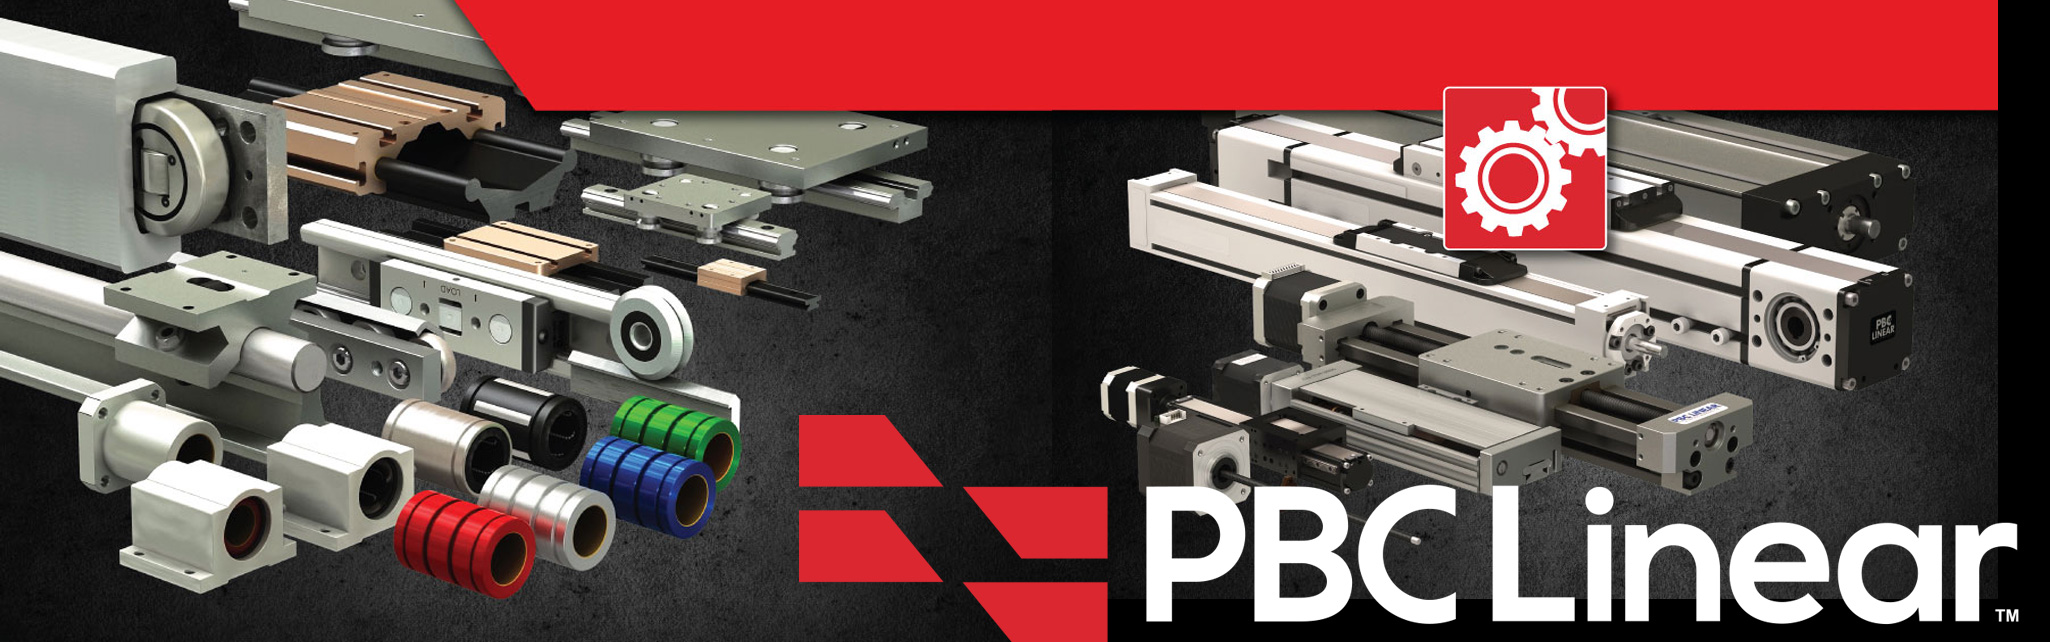 In 1983 PBC Linear was known as the Pacific Bearing Company. Today, PBC Linear of Rockford, IL, is a manufacturer of linear motion solutions.